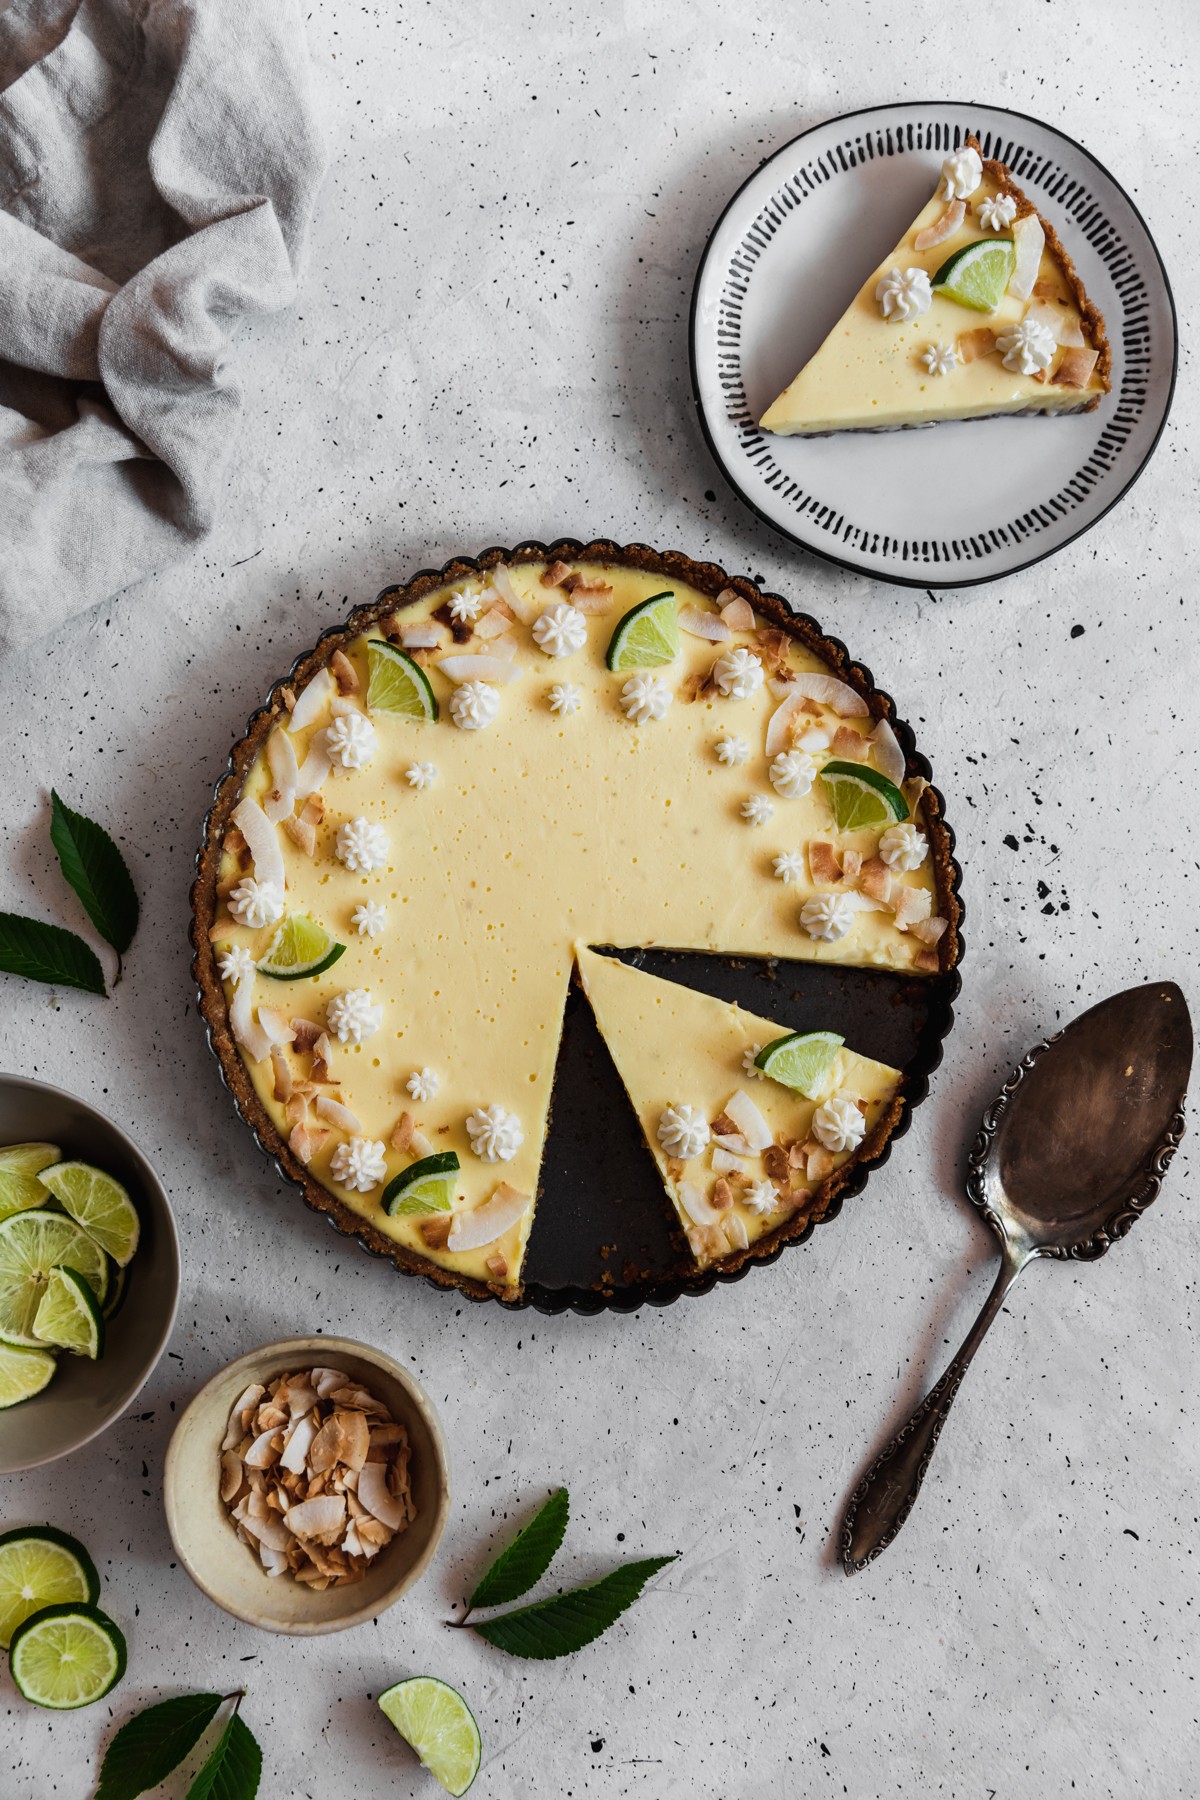 An overhead image of a sliced coconut key lime tart in a black pan on a grey table surrounded by a white plate topped with a tart slice, a beige linen, a vintage pie server, and a grey bowl of limes.